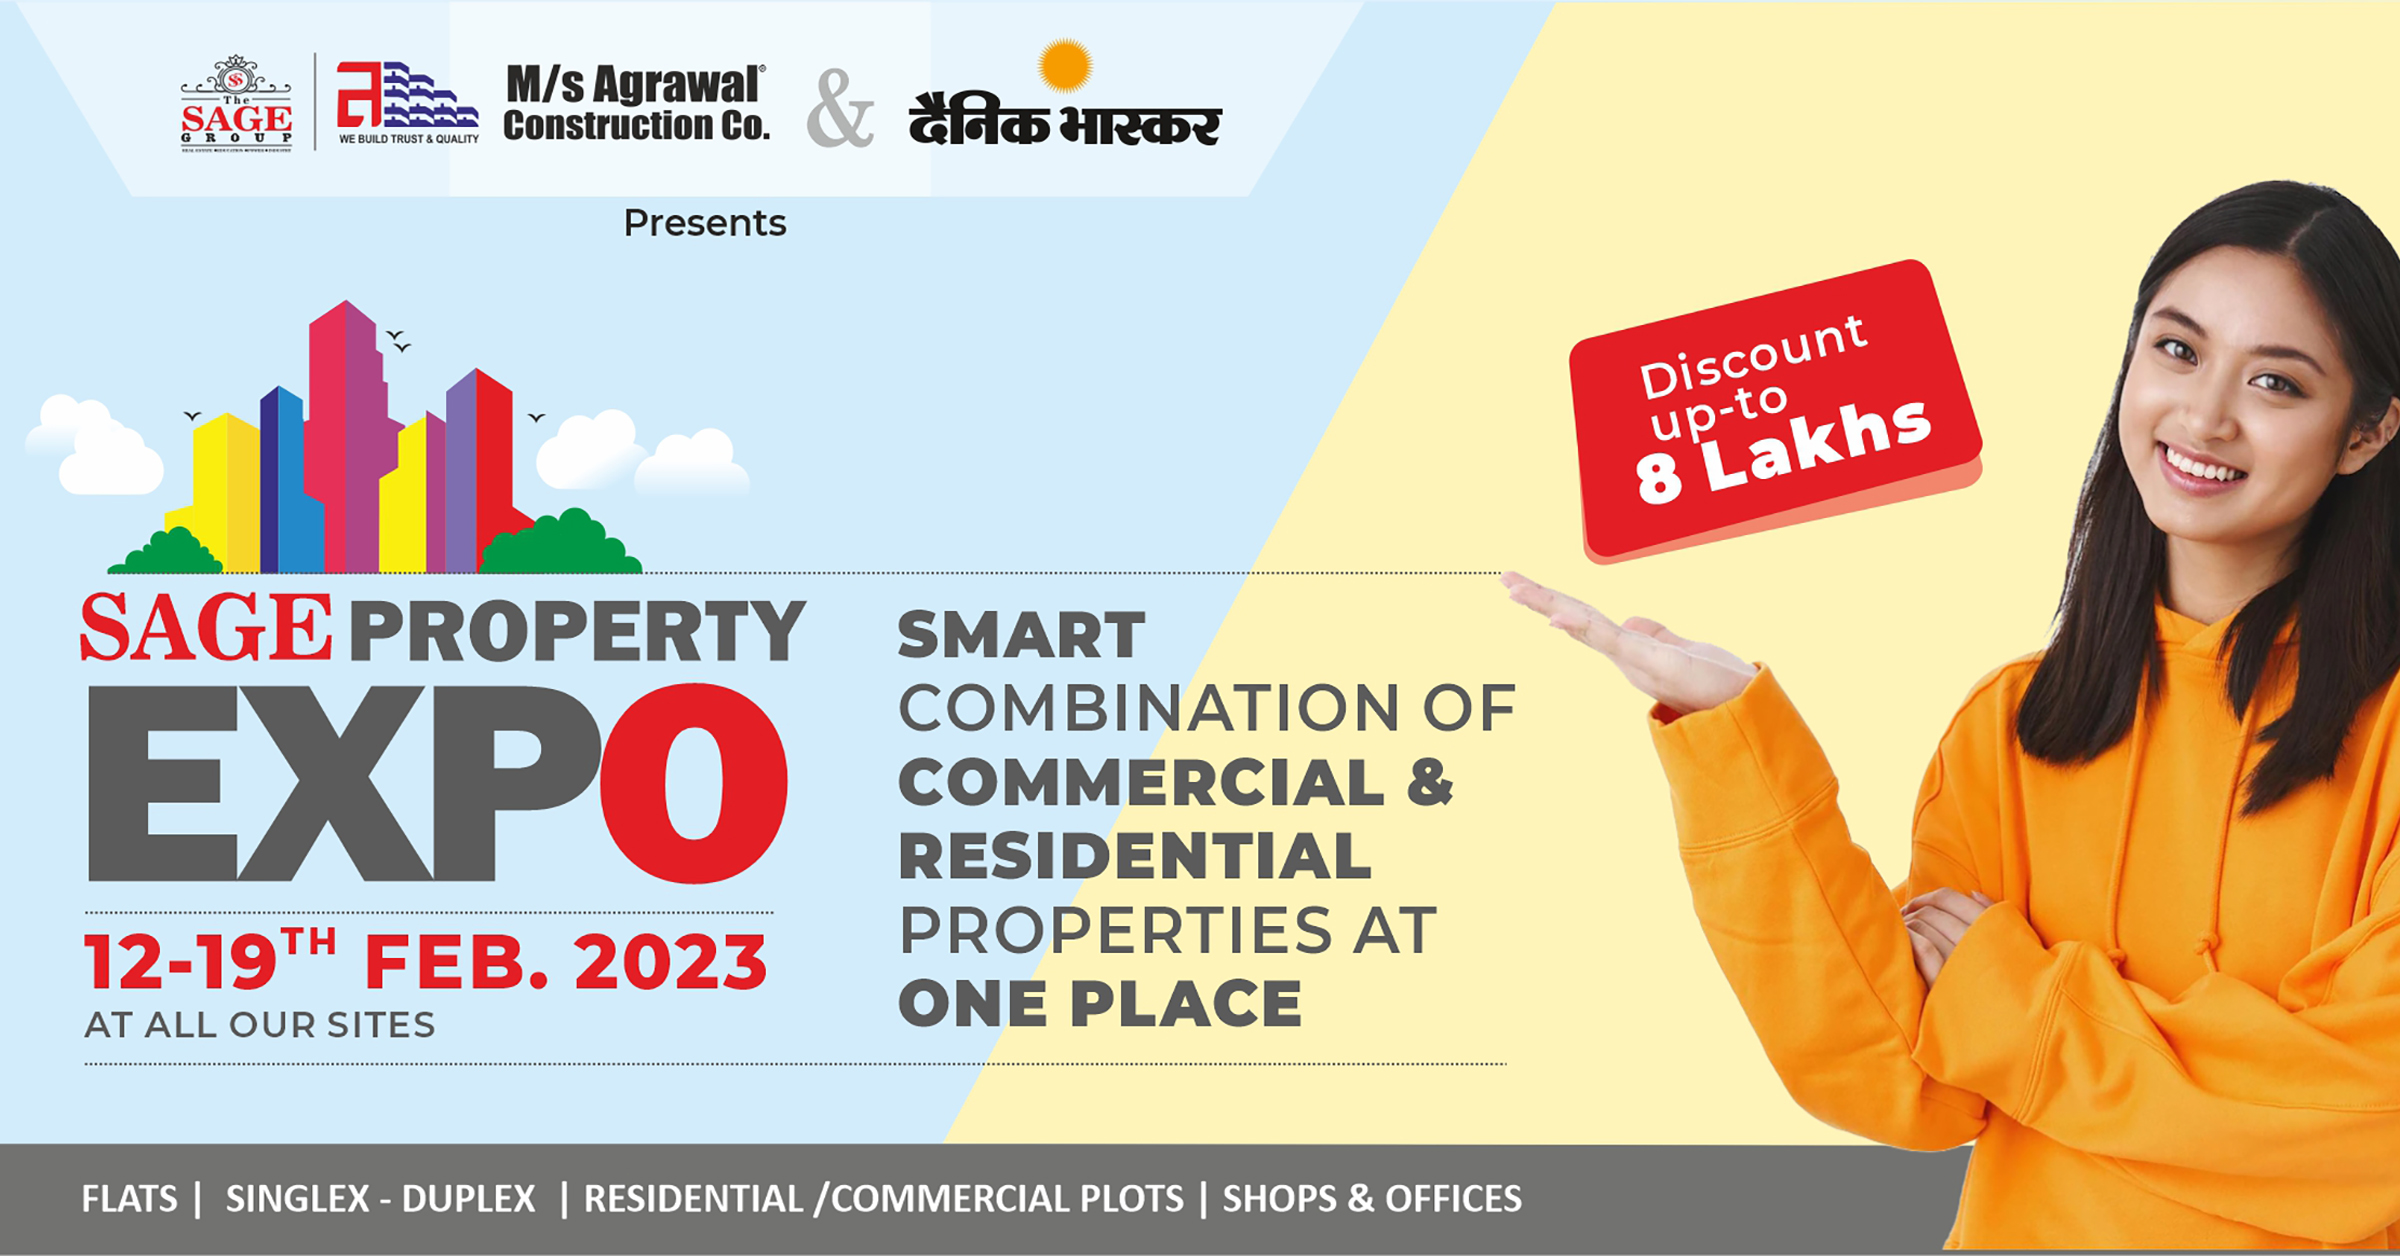 One Time Real Estate Opportunity to Get Discounts up to 8 Lakhs on Premium Properties